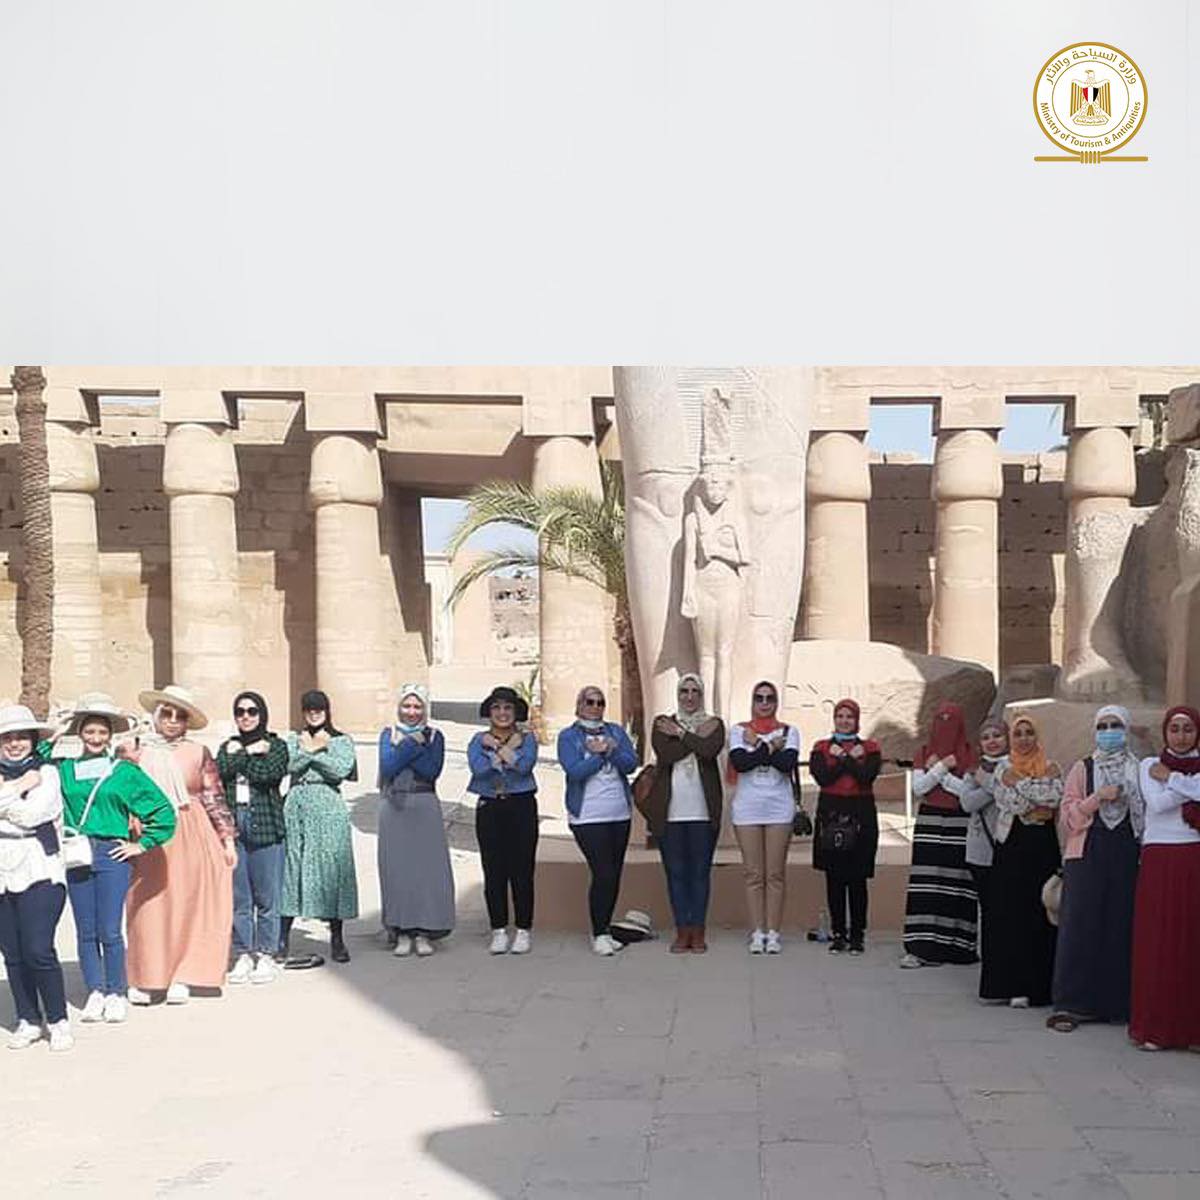 During the trip - Min. of Tourism & Antiquities